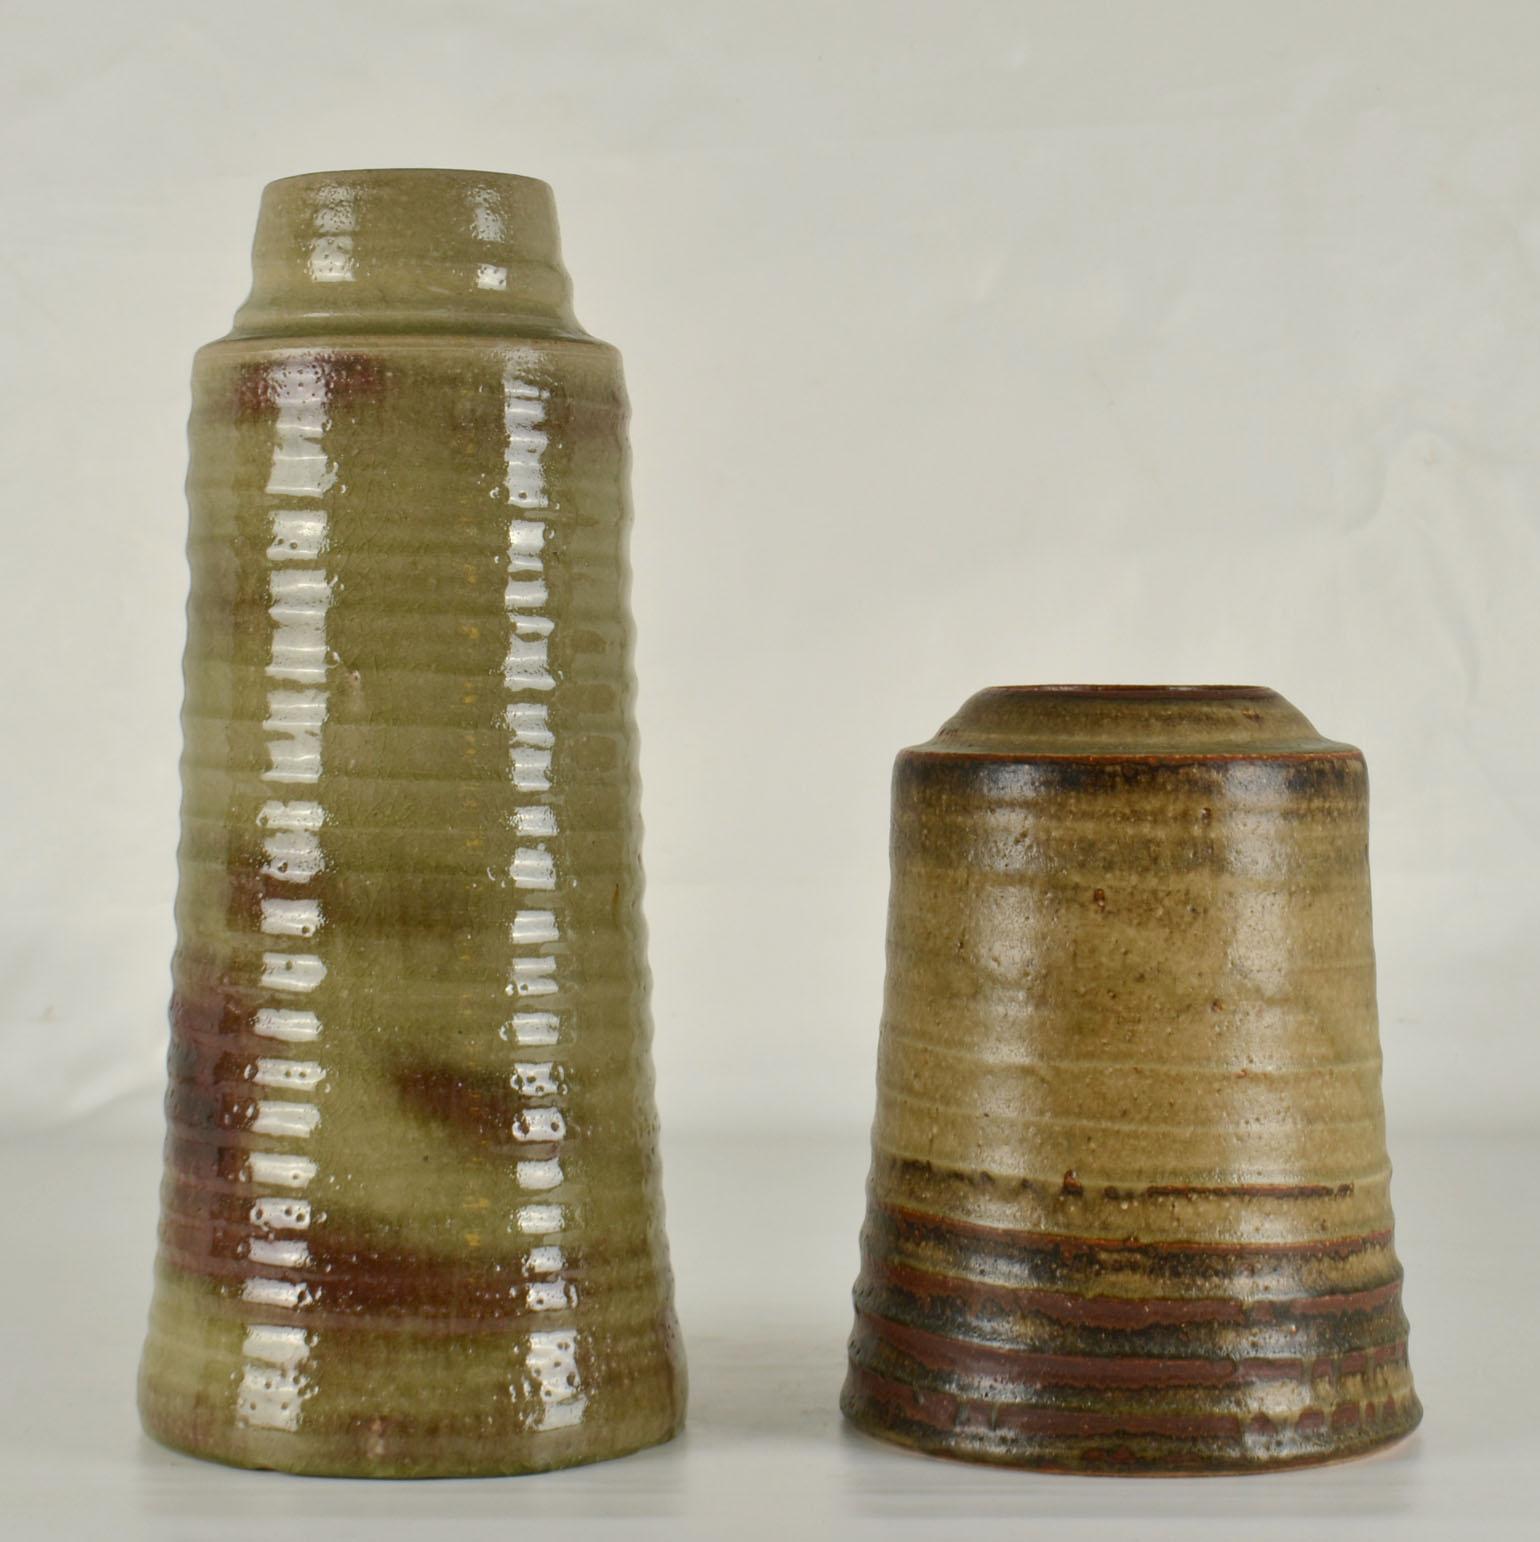 A pair of cylinder vases in differing heights in earth tone glazes in muted tones, created on the turning wheel by highly technical skilled master Dutch potter Jaan Mobach, ceramist in the 1960-70's. The turning leaves imprints of the makers hands